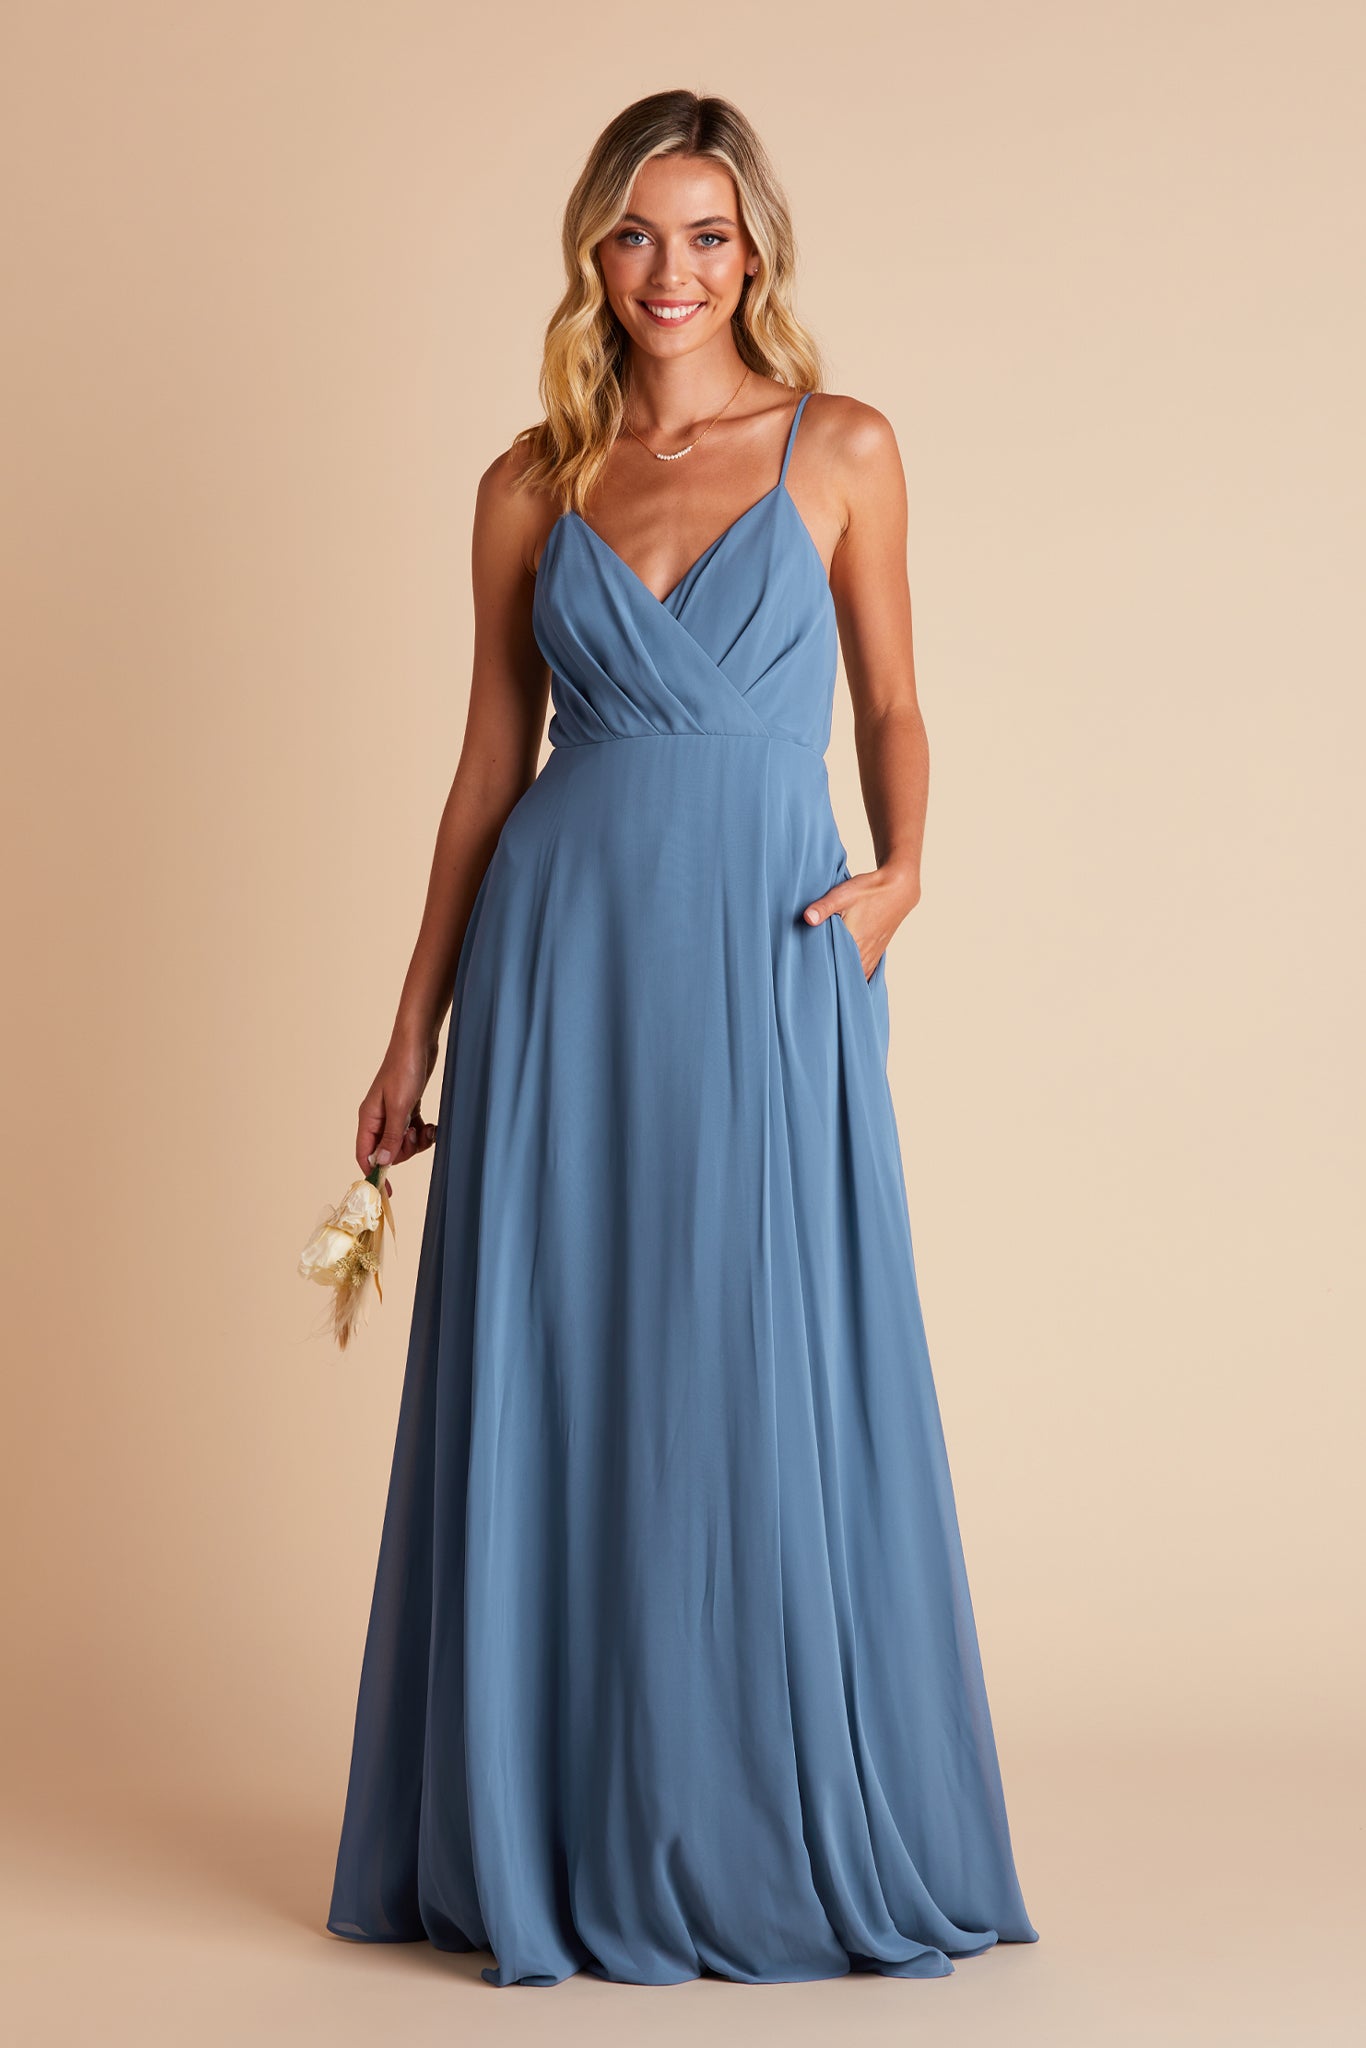 Kaia bridesmaids dress in twilight blue chiffon by Birdy Grey, front view with hand in pocket